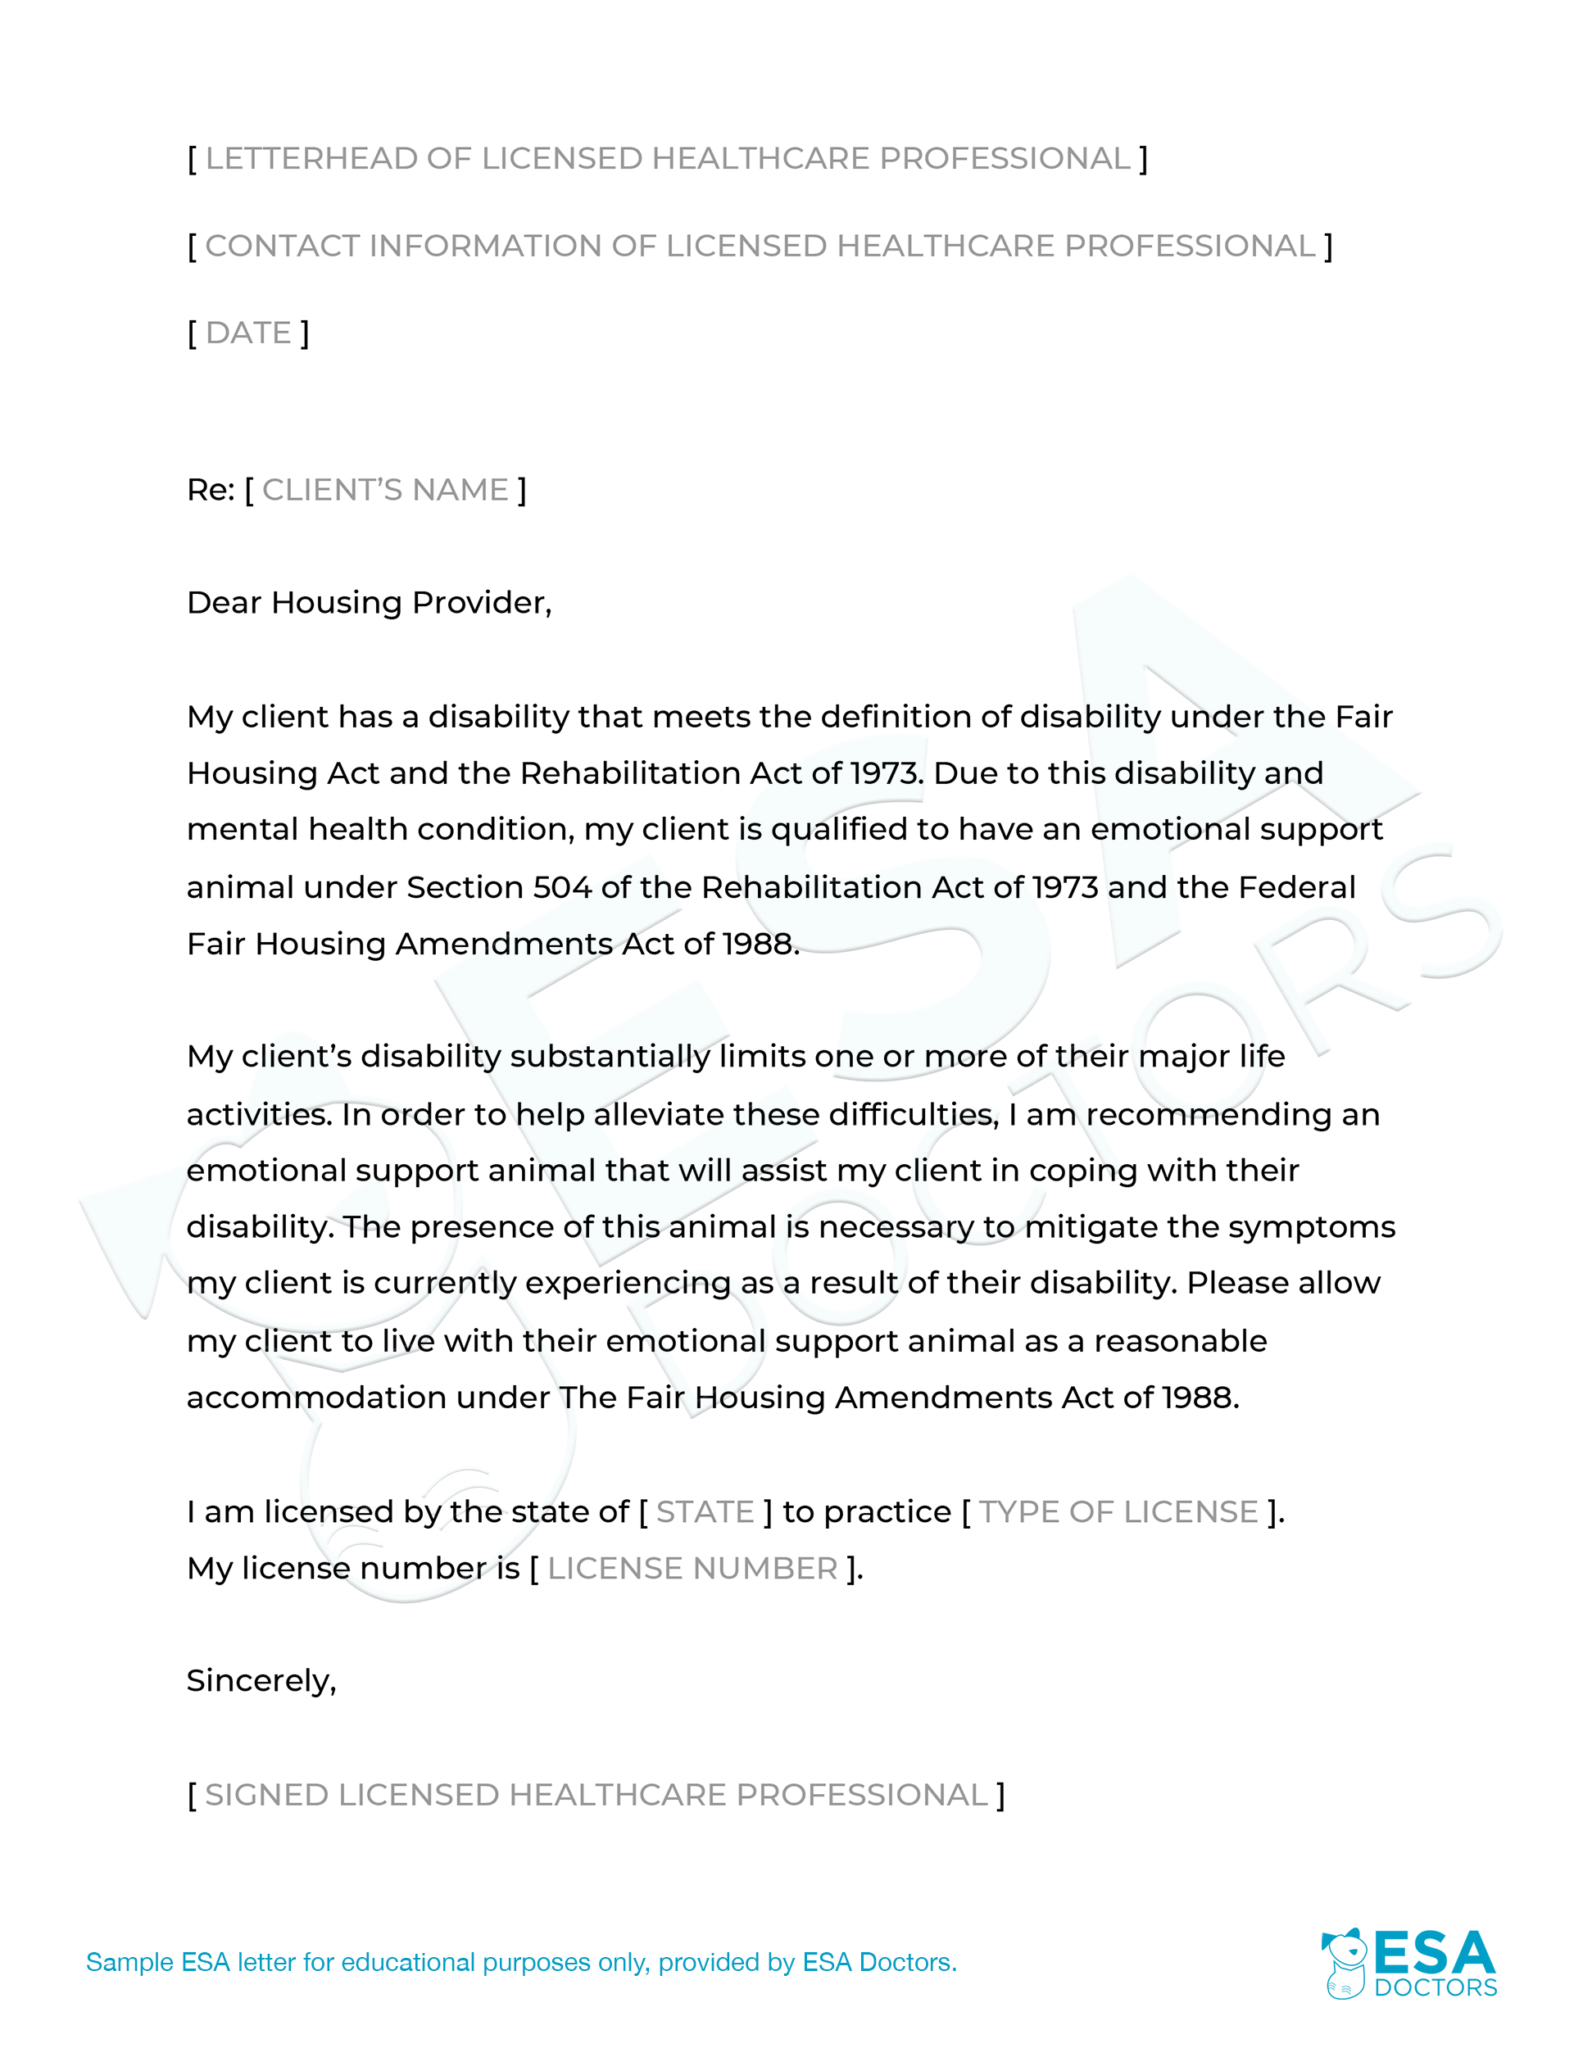 esa-letter-template-examples-letter-template-collection-reverasite